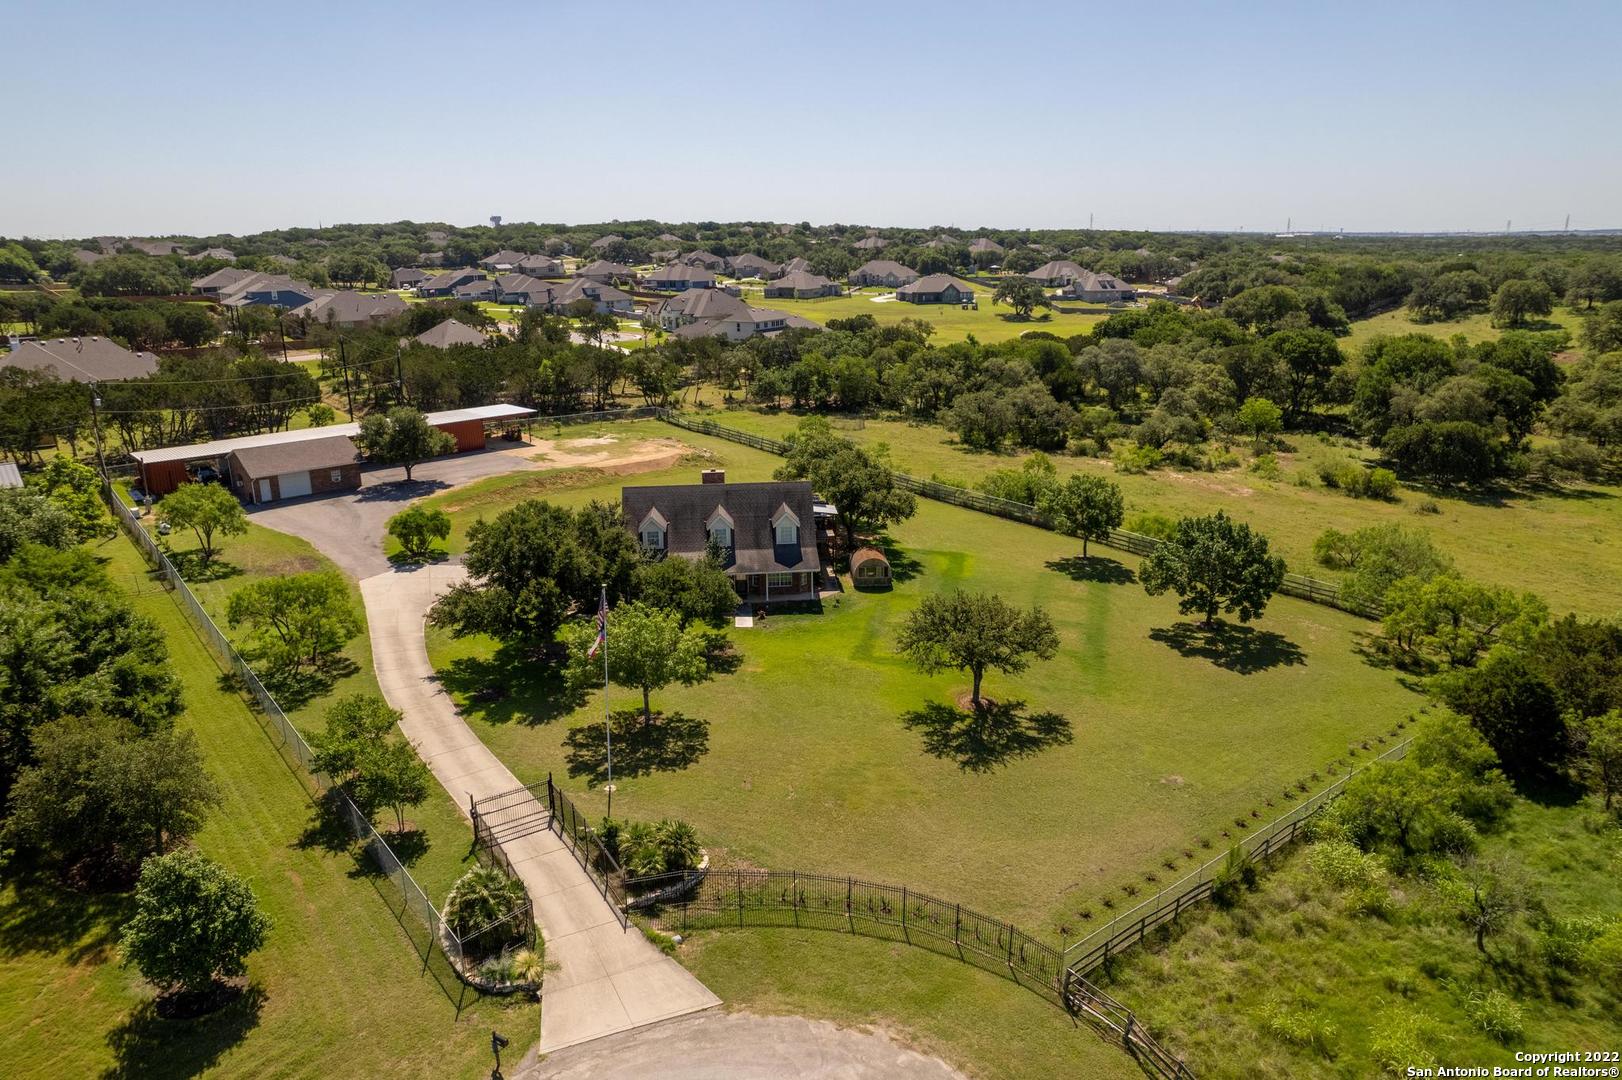 The property's magnificent location is key to its value. This 1.86-acre estate exists in Comal County, outside the city limits of Garden Ridge & San Antonio, on a dead-end, cul-de-sac street with easy access to nearby shopping, dining, & major hwys, IH35, Loop 1604 & 410. Beautiful country landscape with gorgeous greenery, mature trees, deer roaming gently and longhorn steer grazing nearby. The dynamic location, the peaceful views, & the private, secluded lot make this property outstanding! Oh, by the way, No city taxes & No mandatory HOA! The rectangular-shaped, level lot is completely fenced with six-foot chain link fencing & accentuated with secure wrought iron fencing & gated entrance with a twelve-foot wide electric gate with remote, and, or, keypad access.  The long concrete driveway welcomes you to a two-story, all-brick home with covered front & back patios & an attached two-car garage with side entry. Built in 1992 with 2394 square feet, the home features beautiful hardwood flooring, a cathedral ceiling, a wood-burning fireplace, an eat-in kitchen with an island, a breakfast bar, and a separate dining area. Upstairs, with its own private entrance, is a guest suite that includes a large bedroom, a full bath, & huge walk-in closet. A perfectly planned eat-in kitchen and an inviting living area, a large pantry for extra storage & awesome views off the covered balcony. Flexible floor plan; can be a three-bedroom, two-bath home with two kitchens. There is a detached workshop or oversized garage with an overhead electric door. Two additional carports for open, covered parking. The seller recently installed a Generac, 24KW, home backup generator with a 250-gallon propane tank- only six months old. The water well is on-site with a chlorinating system. The downstairs kitchen features reverse osmosis for drinking water. There is a 2500-gallon water storage tank which is set on a concrete, heavy-duty pad. Also included is a 1000-gallon round concrete, conventional septic tank. With your own water well & septic tank, you'll have no water bills! City utilities, high-speed internet, & cable are available. Private trash services. U.S. mail is delivered daily. Two ac/heat pump systems were installed in the home about a year and a half ago. A new roof is to be installed.  And, lastly, there are two RV hookups, both under a cover with 240V electric service. Must see to appreciate!